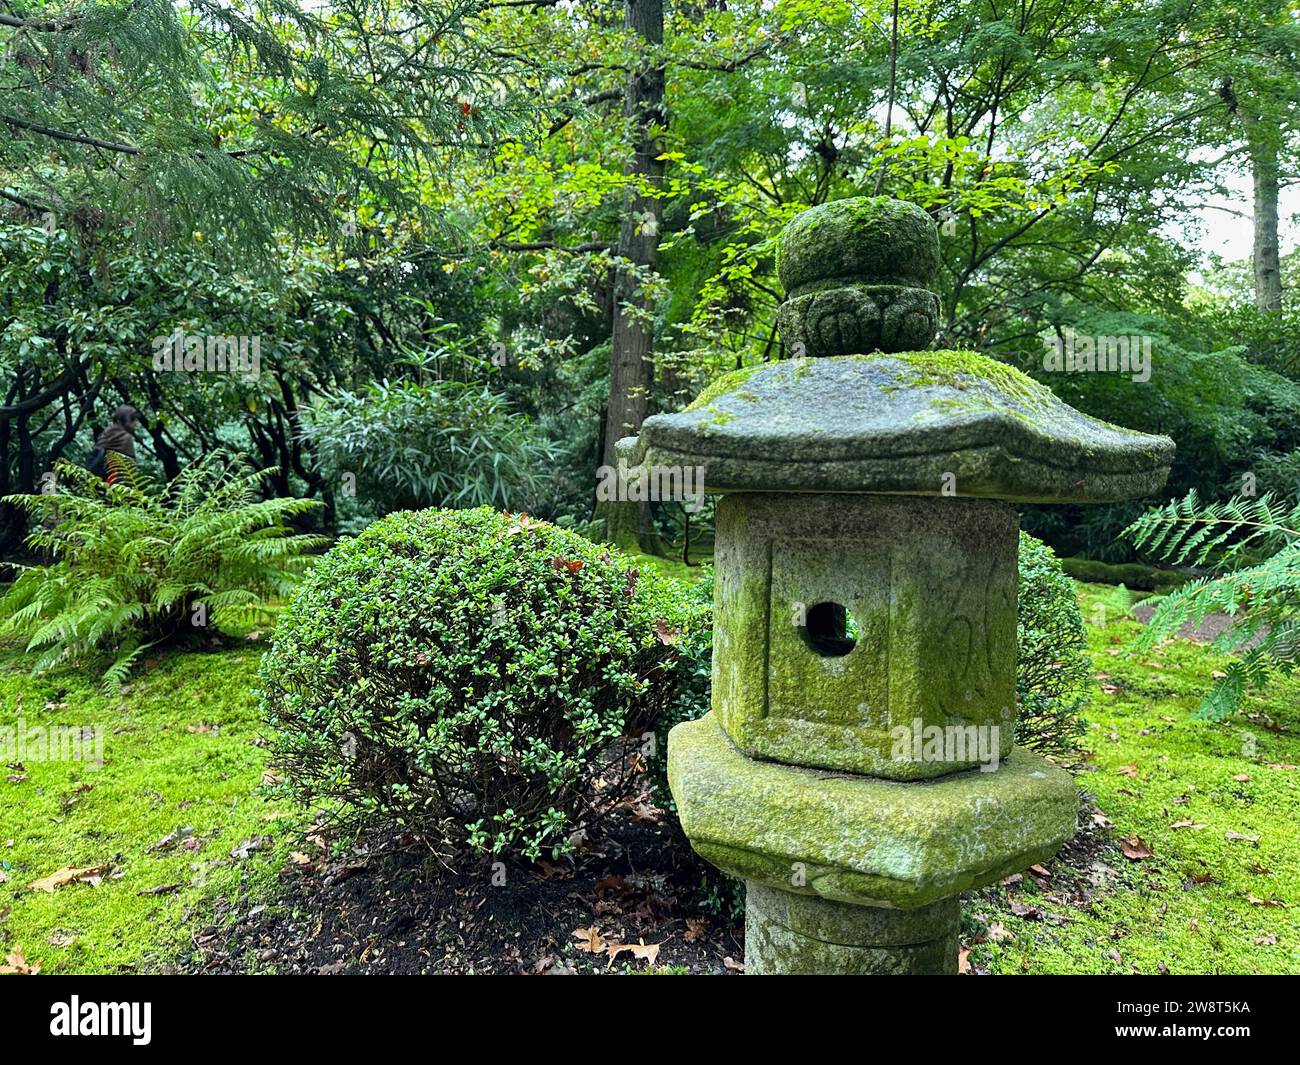 Stone lantern, bright moss and different plants in Japanese garden Stock Photo